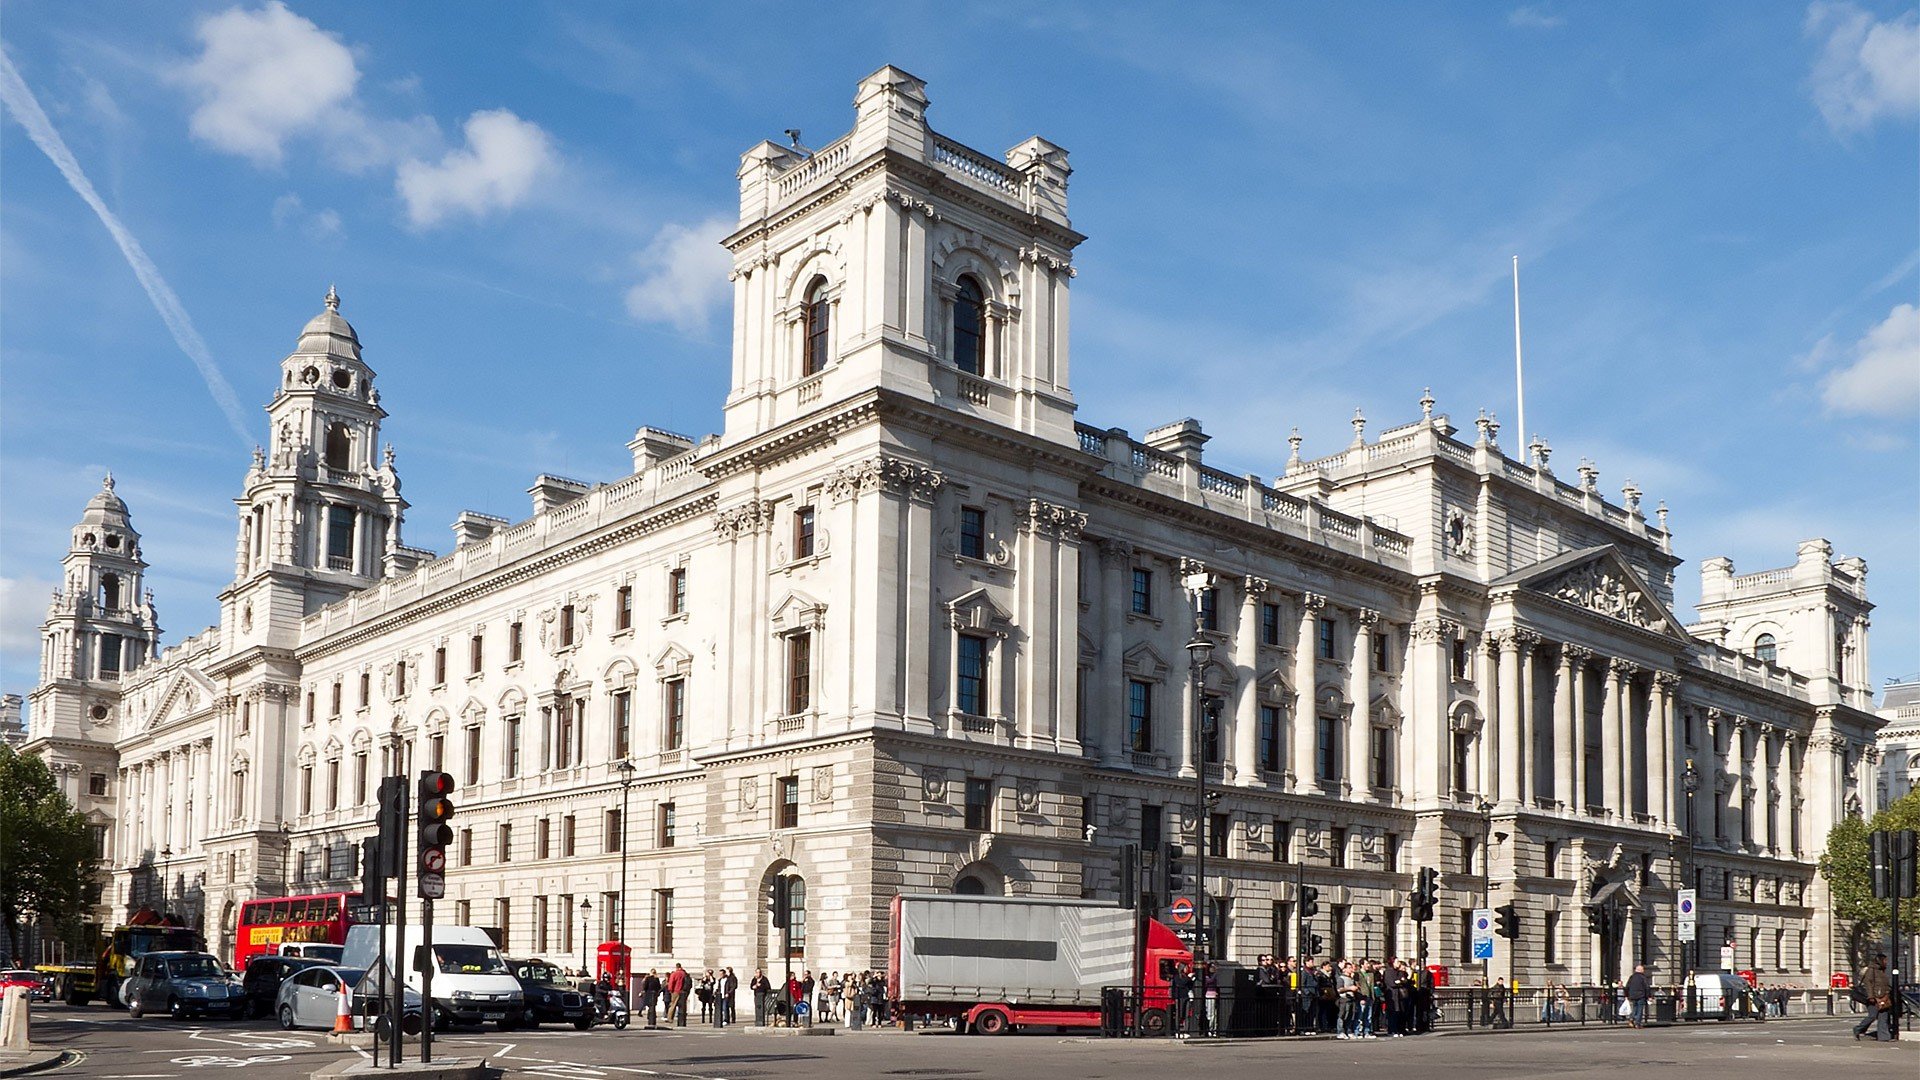 DCMS select committee launches inquiry into the UK government's approach to gambling regulation